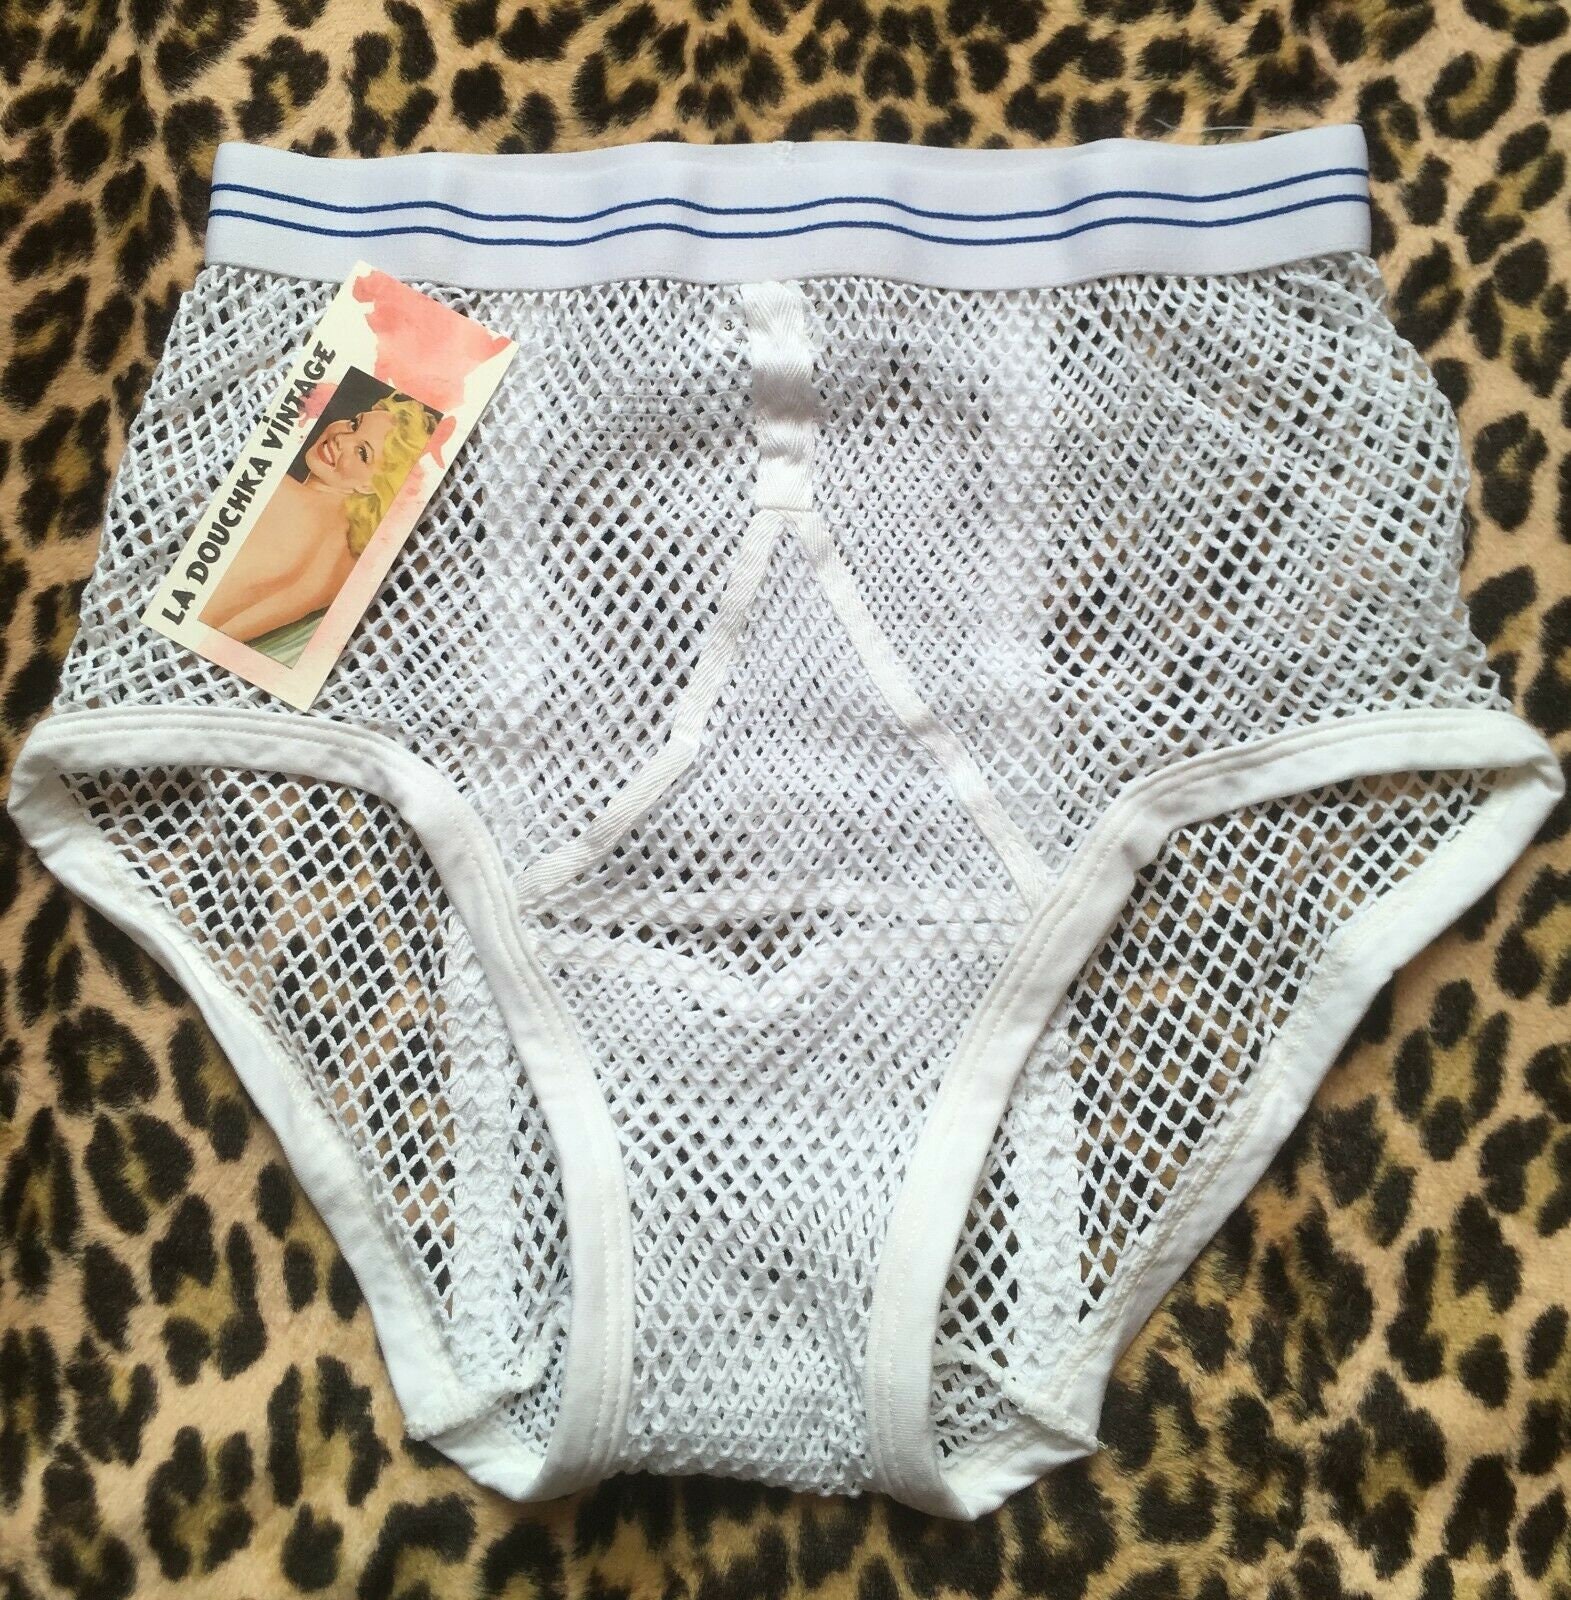 Old School 1970s Men Vintage Sexy Y-Front Brief Underwear - High Quality  White Mesh Combed Cotton & High Waisted - New - L